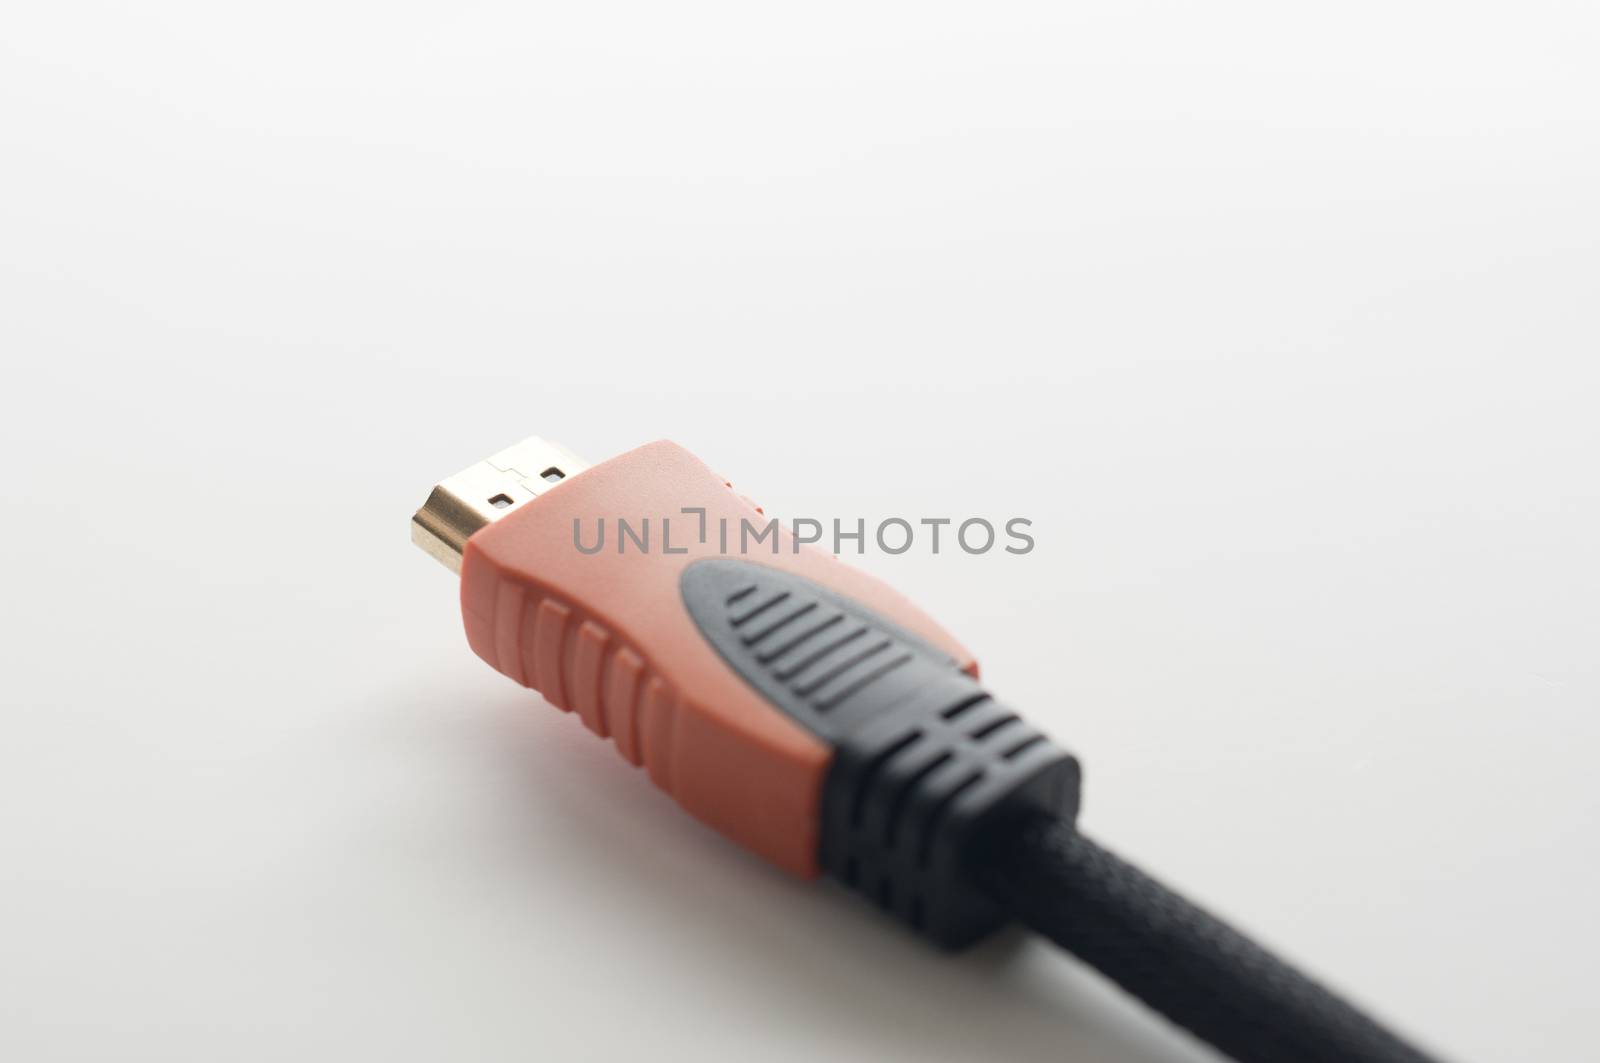 HDMI cable on white background